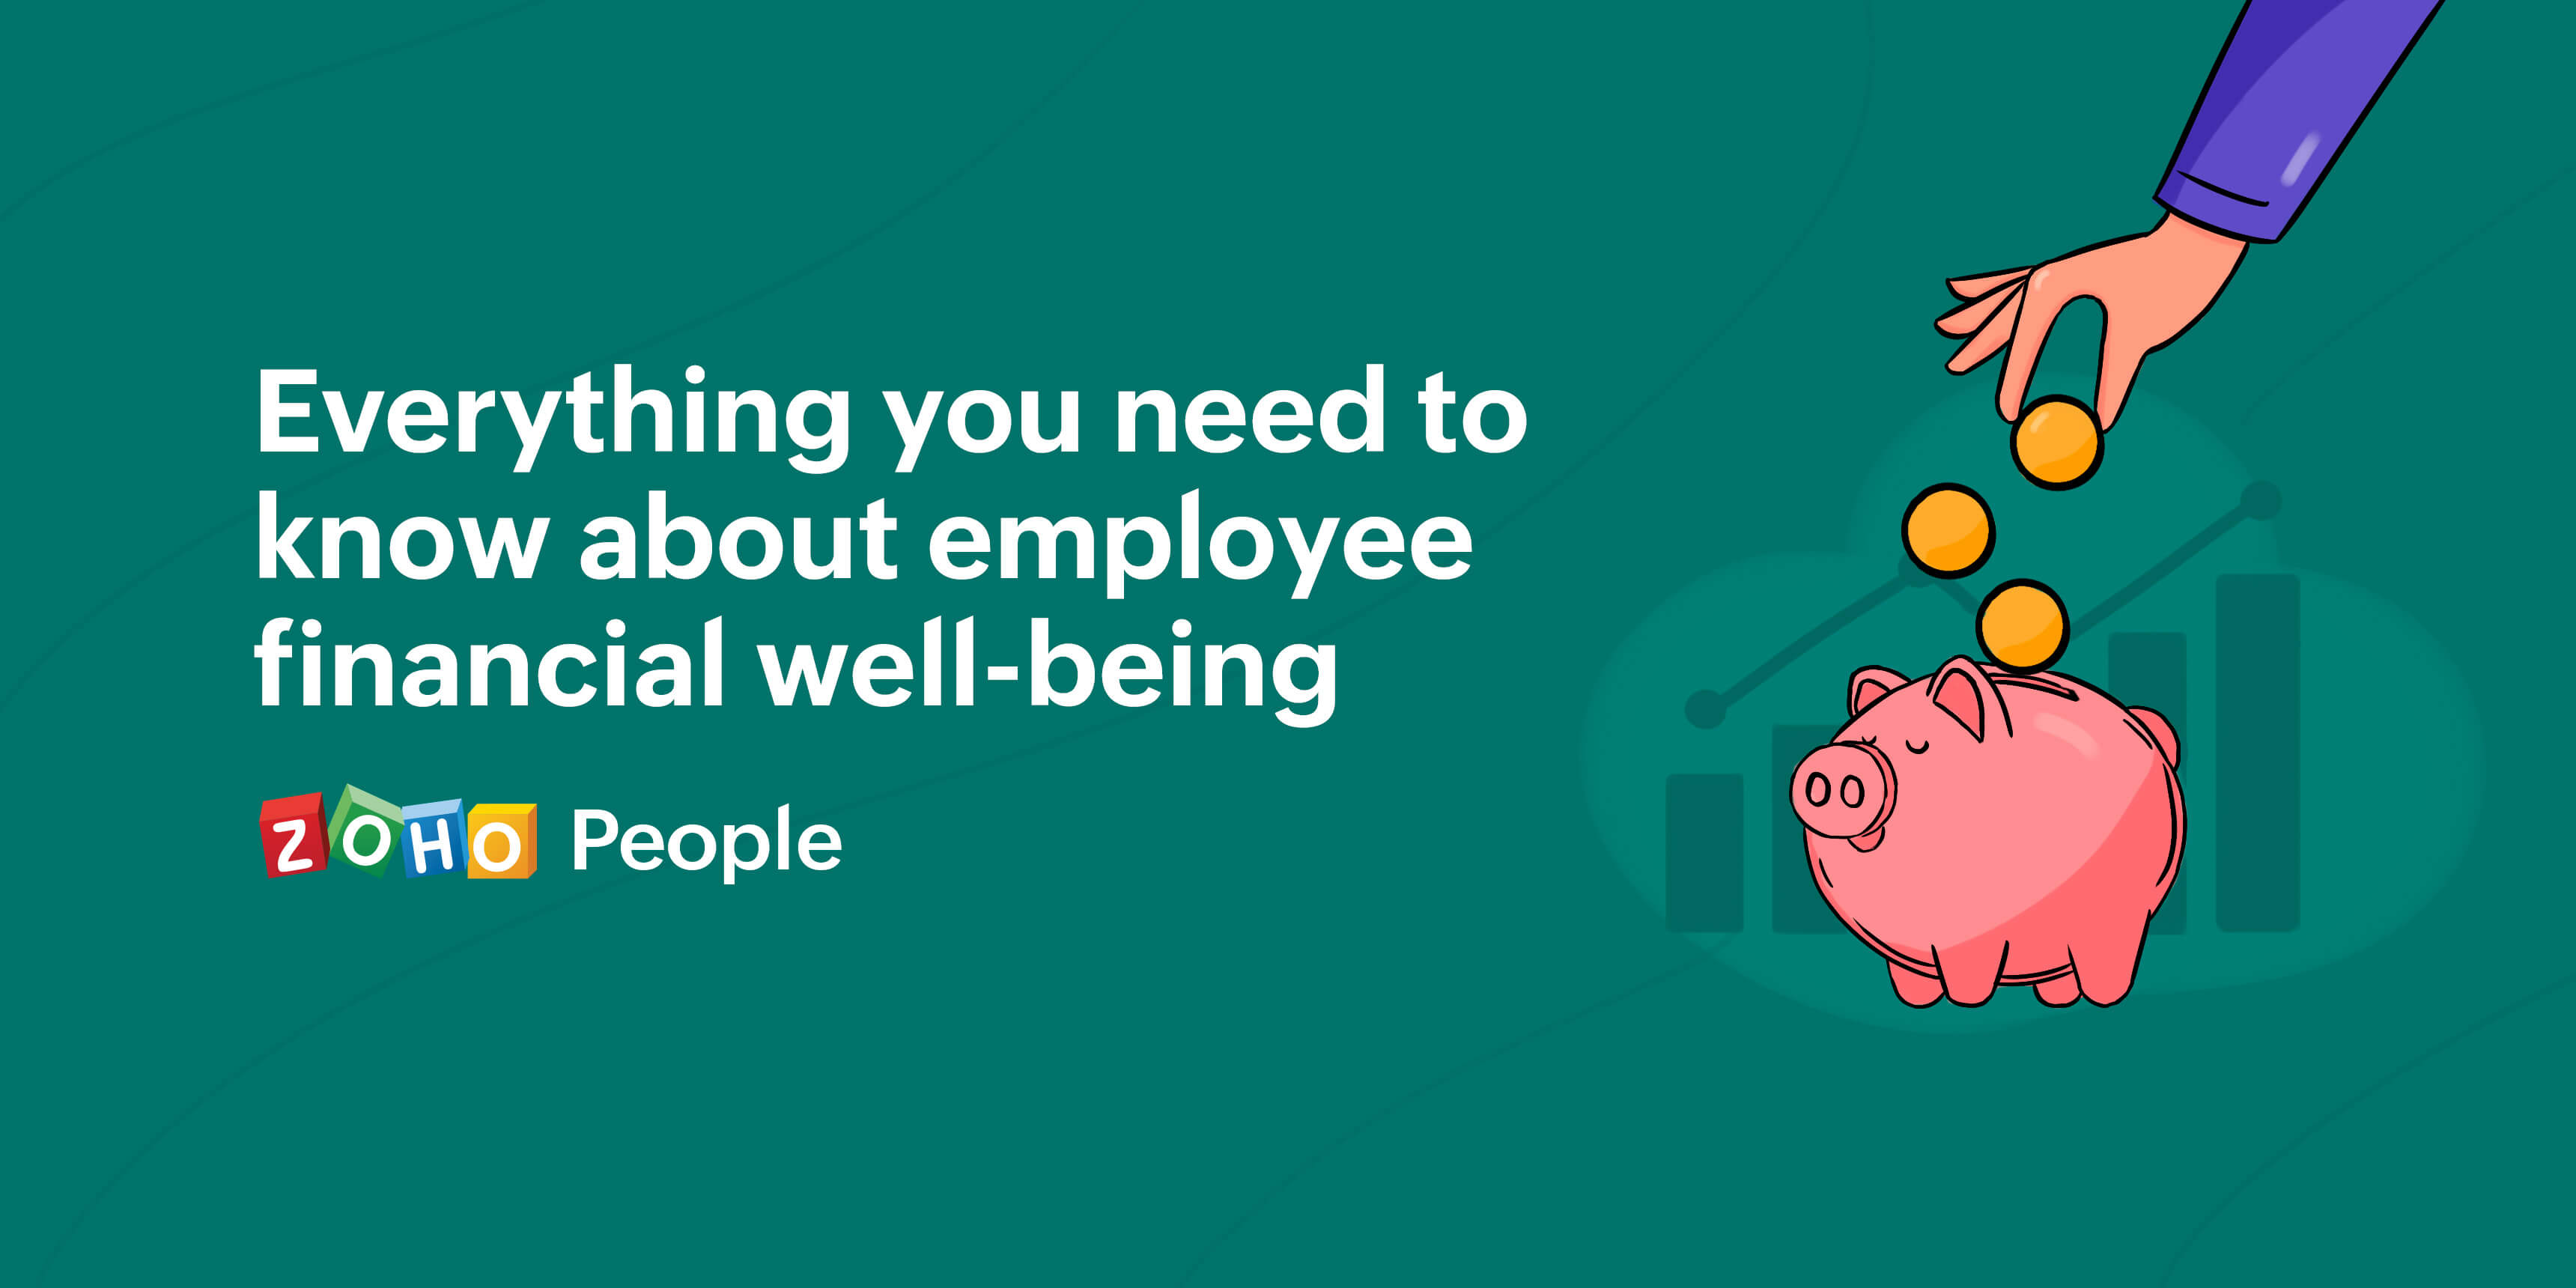 4 tips to strengthen your employees' financial well-being